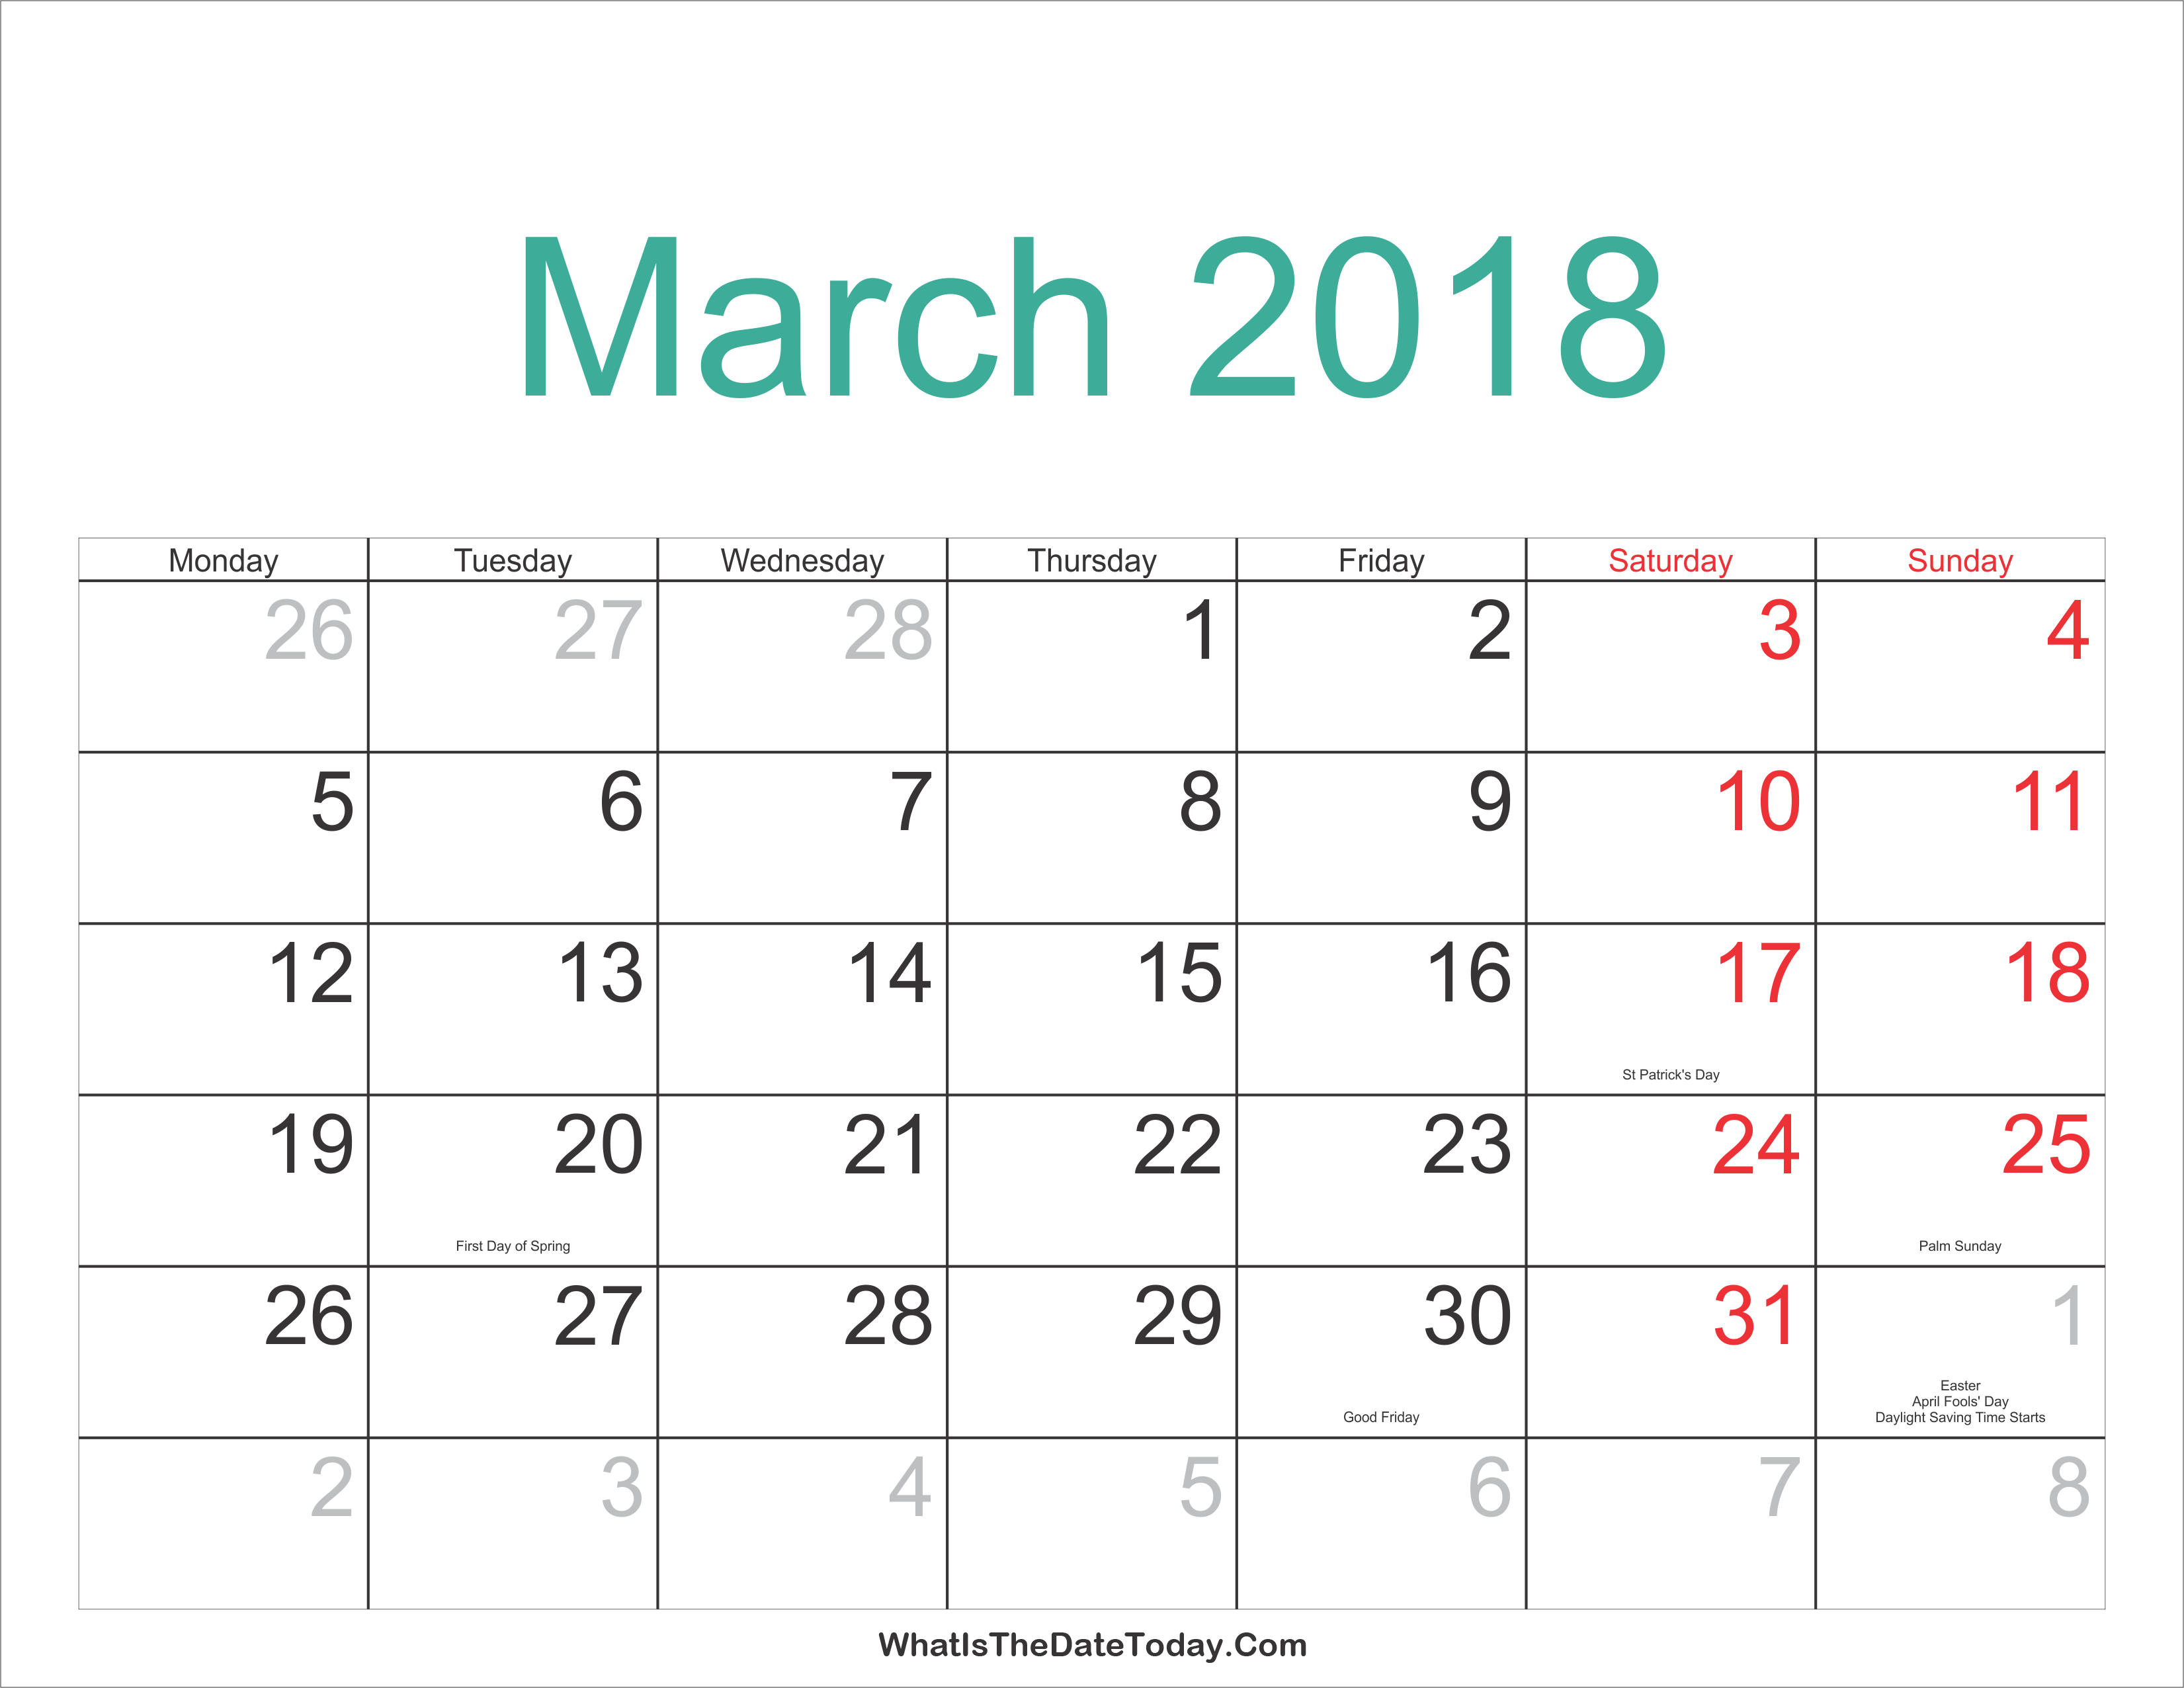 march-2018-calendar-printable-with-holidays-whatisthedatetoday-com